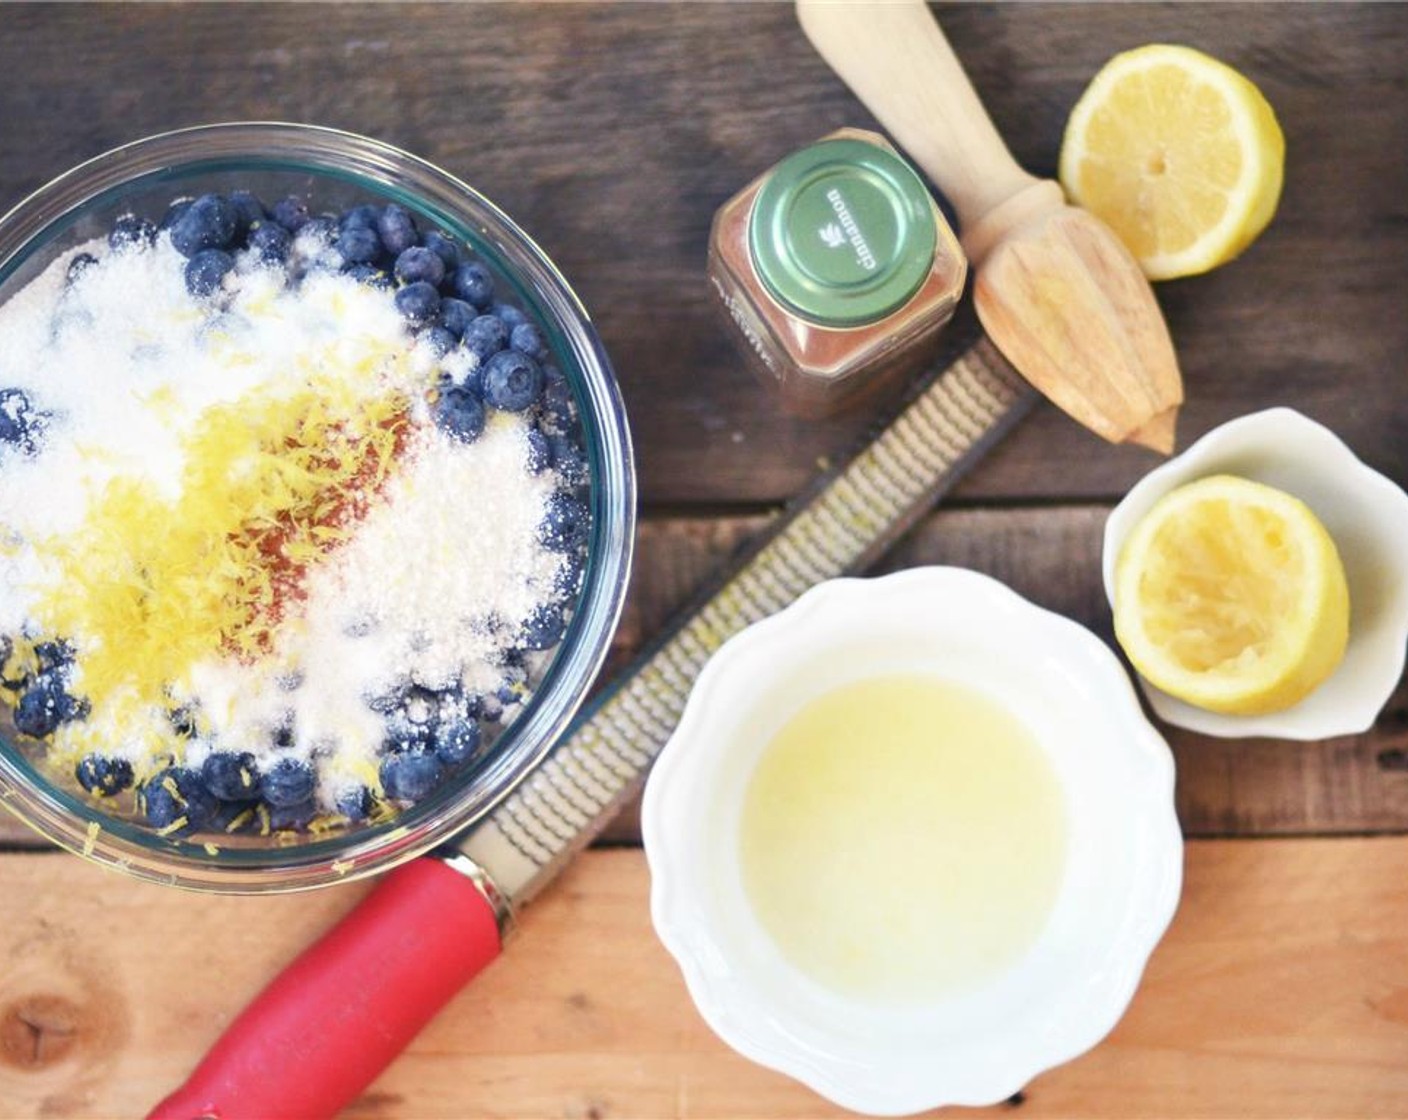 step 10 In a large bowl, combine Fresh Blueberries (4 cups), Granulated Sugar (2/3 cup), Instant Tapioca (3 Tbsp), Salt (1 pinch), Ground Cinnamon (1/4 tsp), and zest of a Lemon (1) and juice from half of that lemon. Toss to combine.